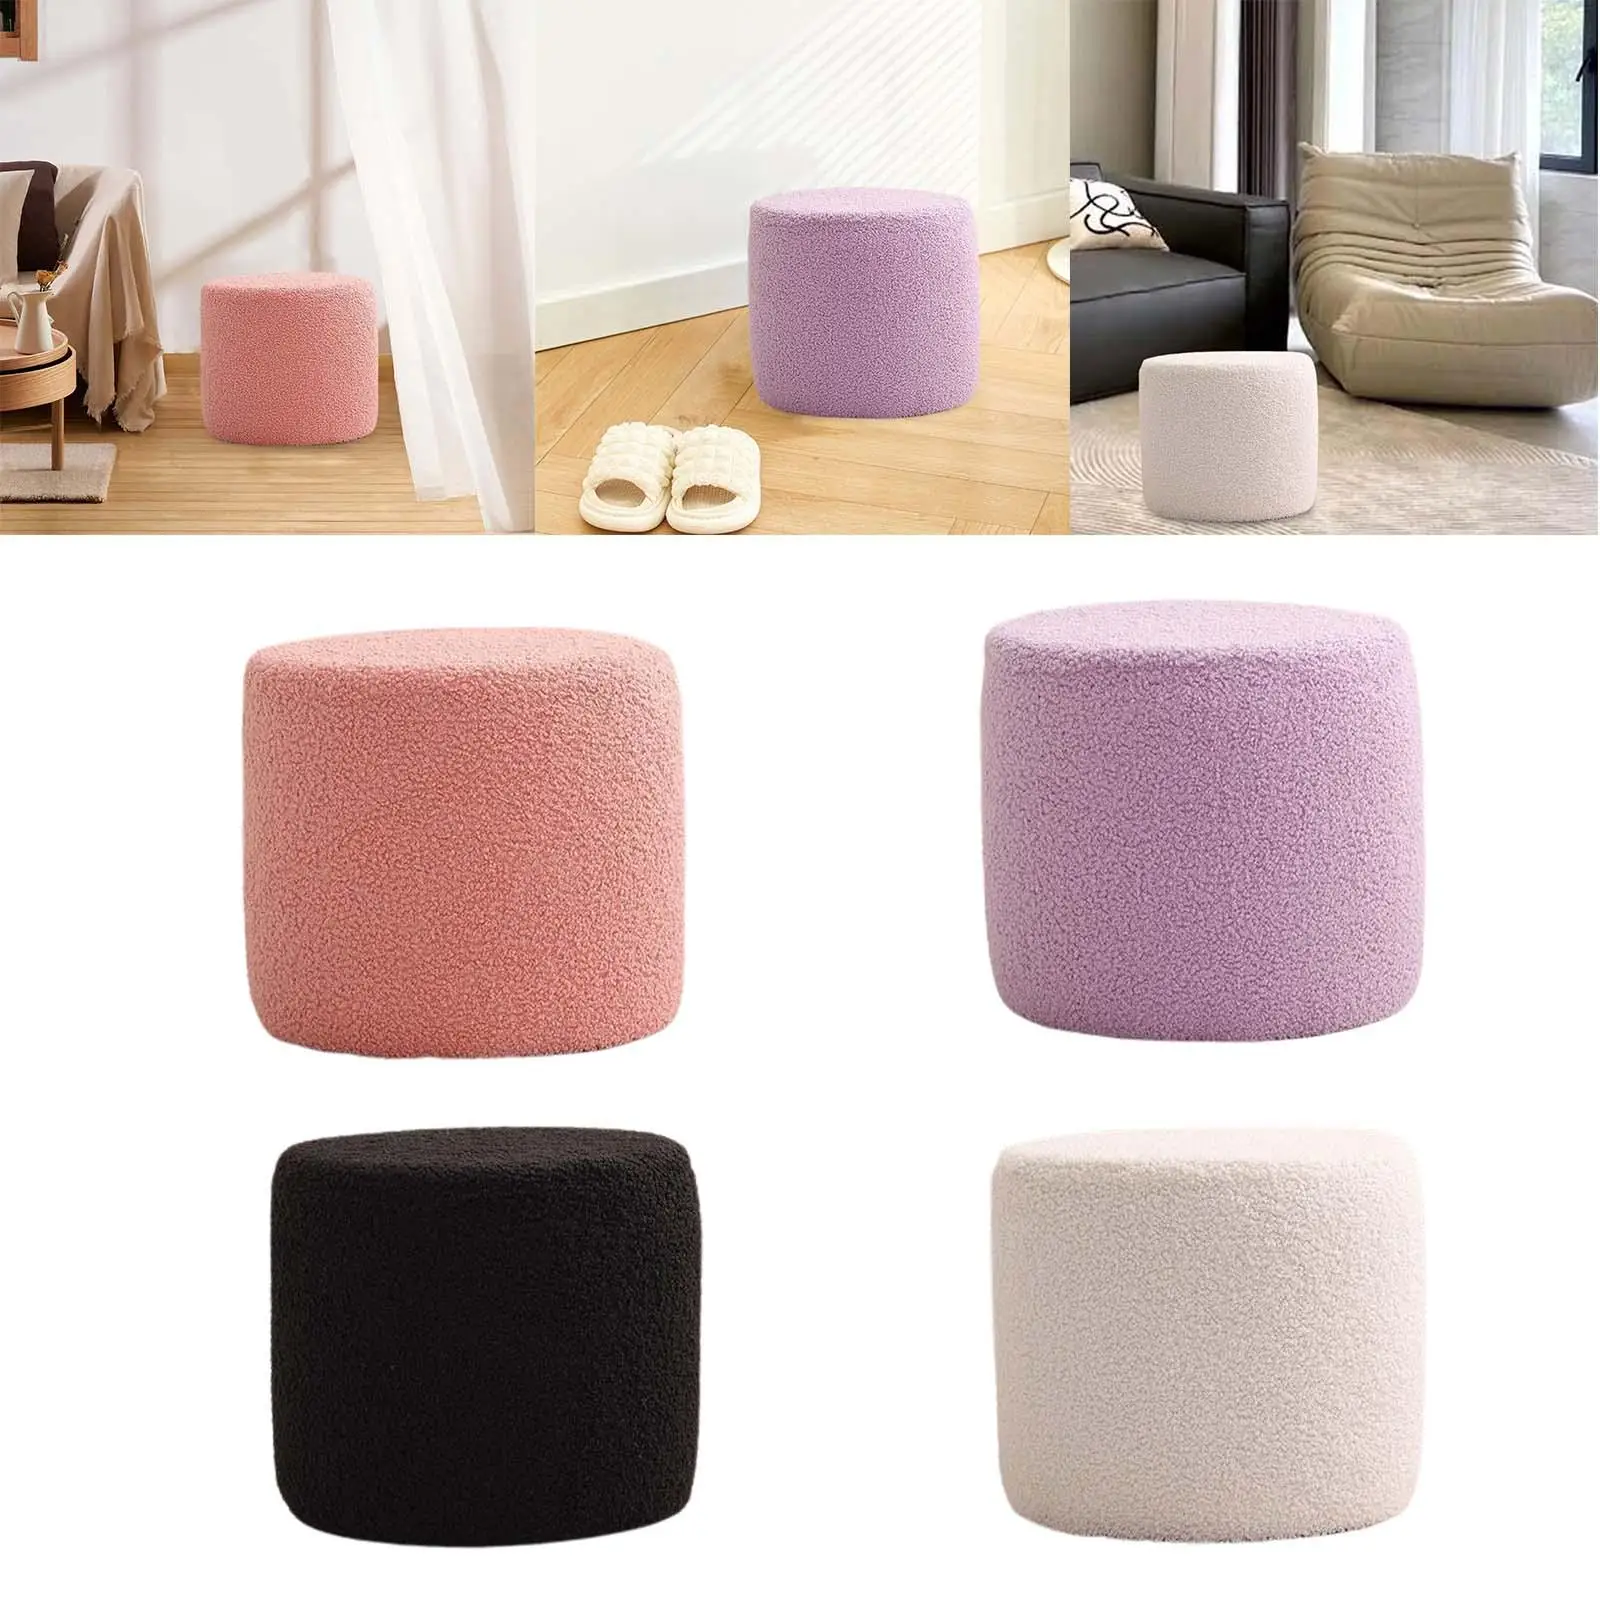 Footstools Ottomans Stable Non Slip Stool Leisure Stool Foot Rest Stool for Entryway Bedroom Living Room Sturdy Room Apartment